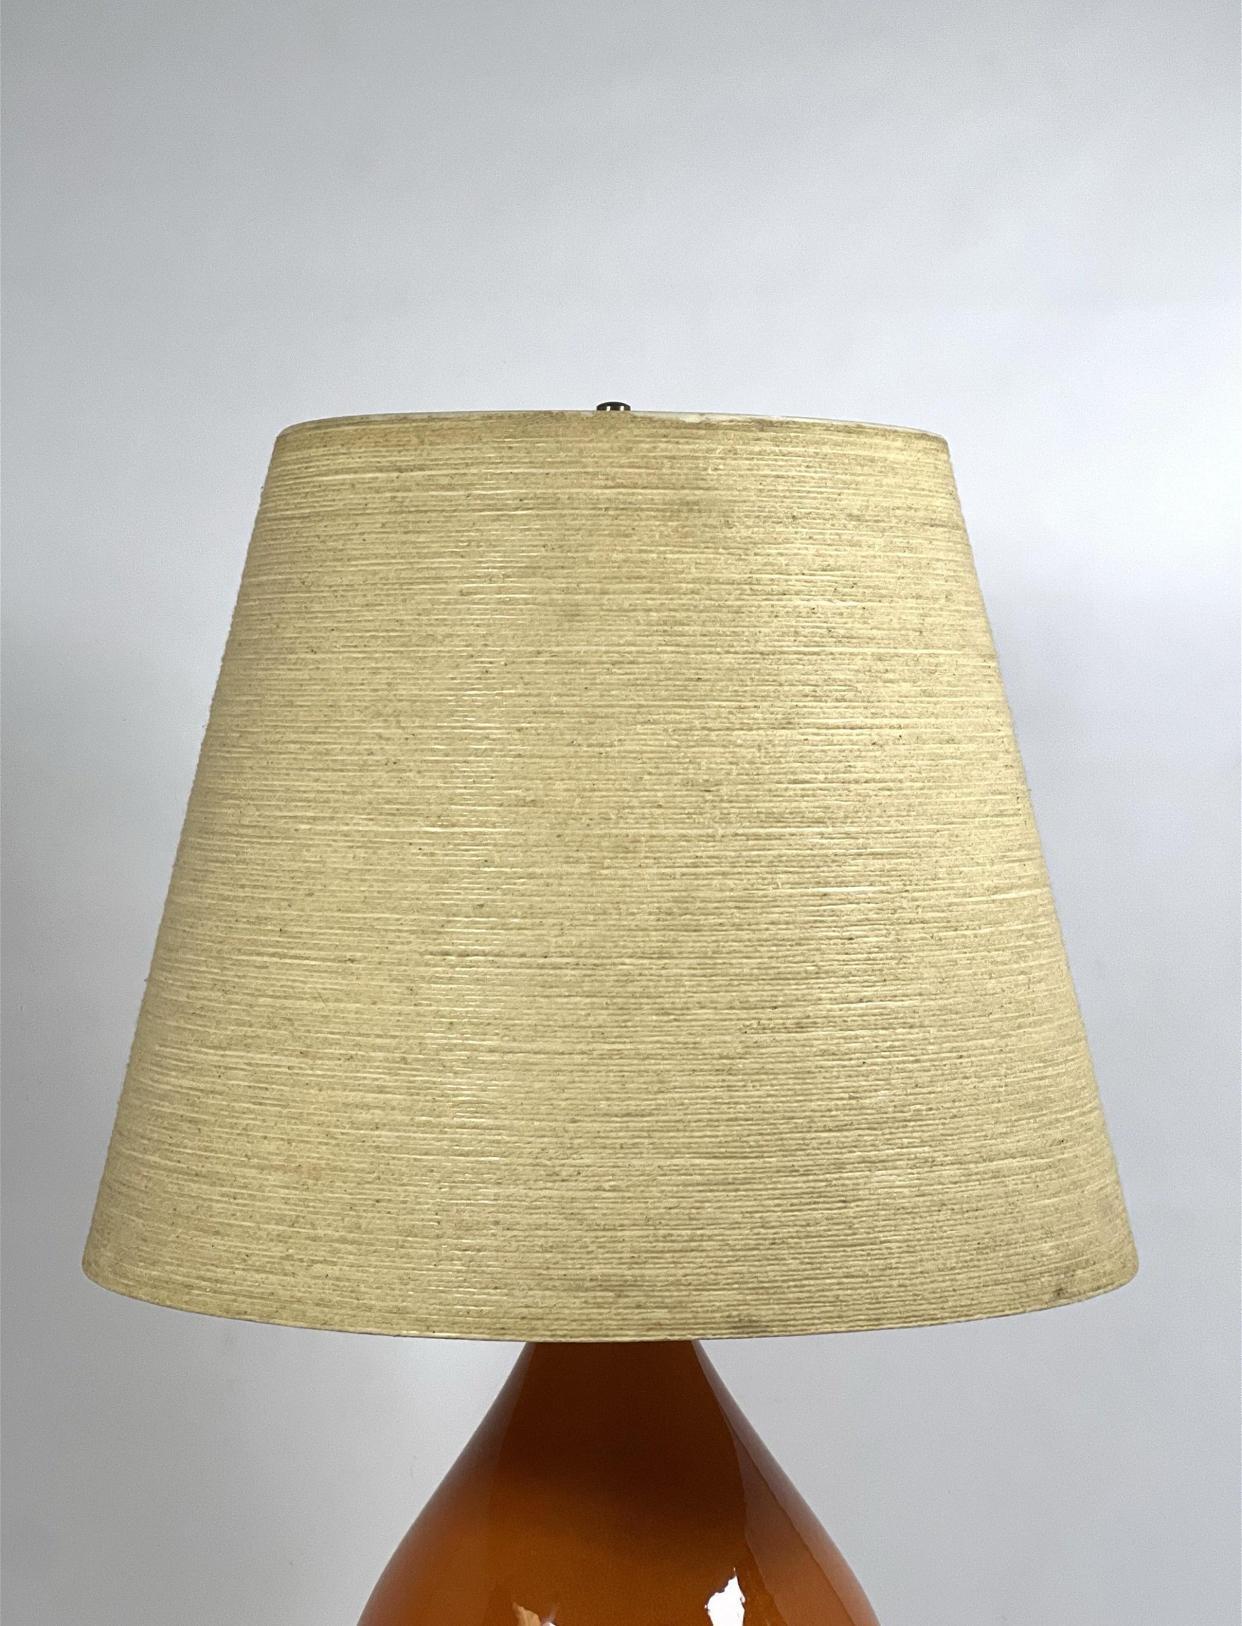 Large Bostlund Gourd Form Ceramic Table Lamp With Original Bostlund Shade In Good Condition For Sale In Chicago, IL